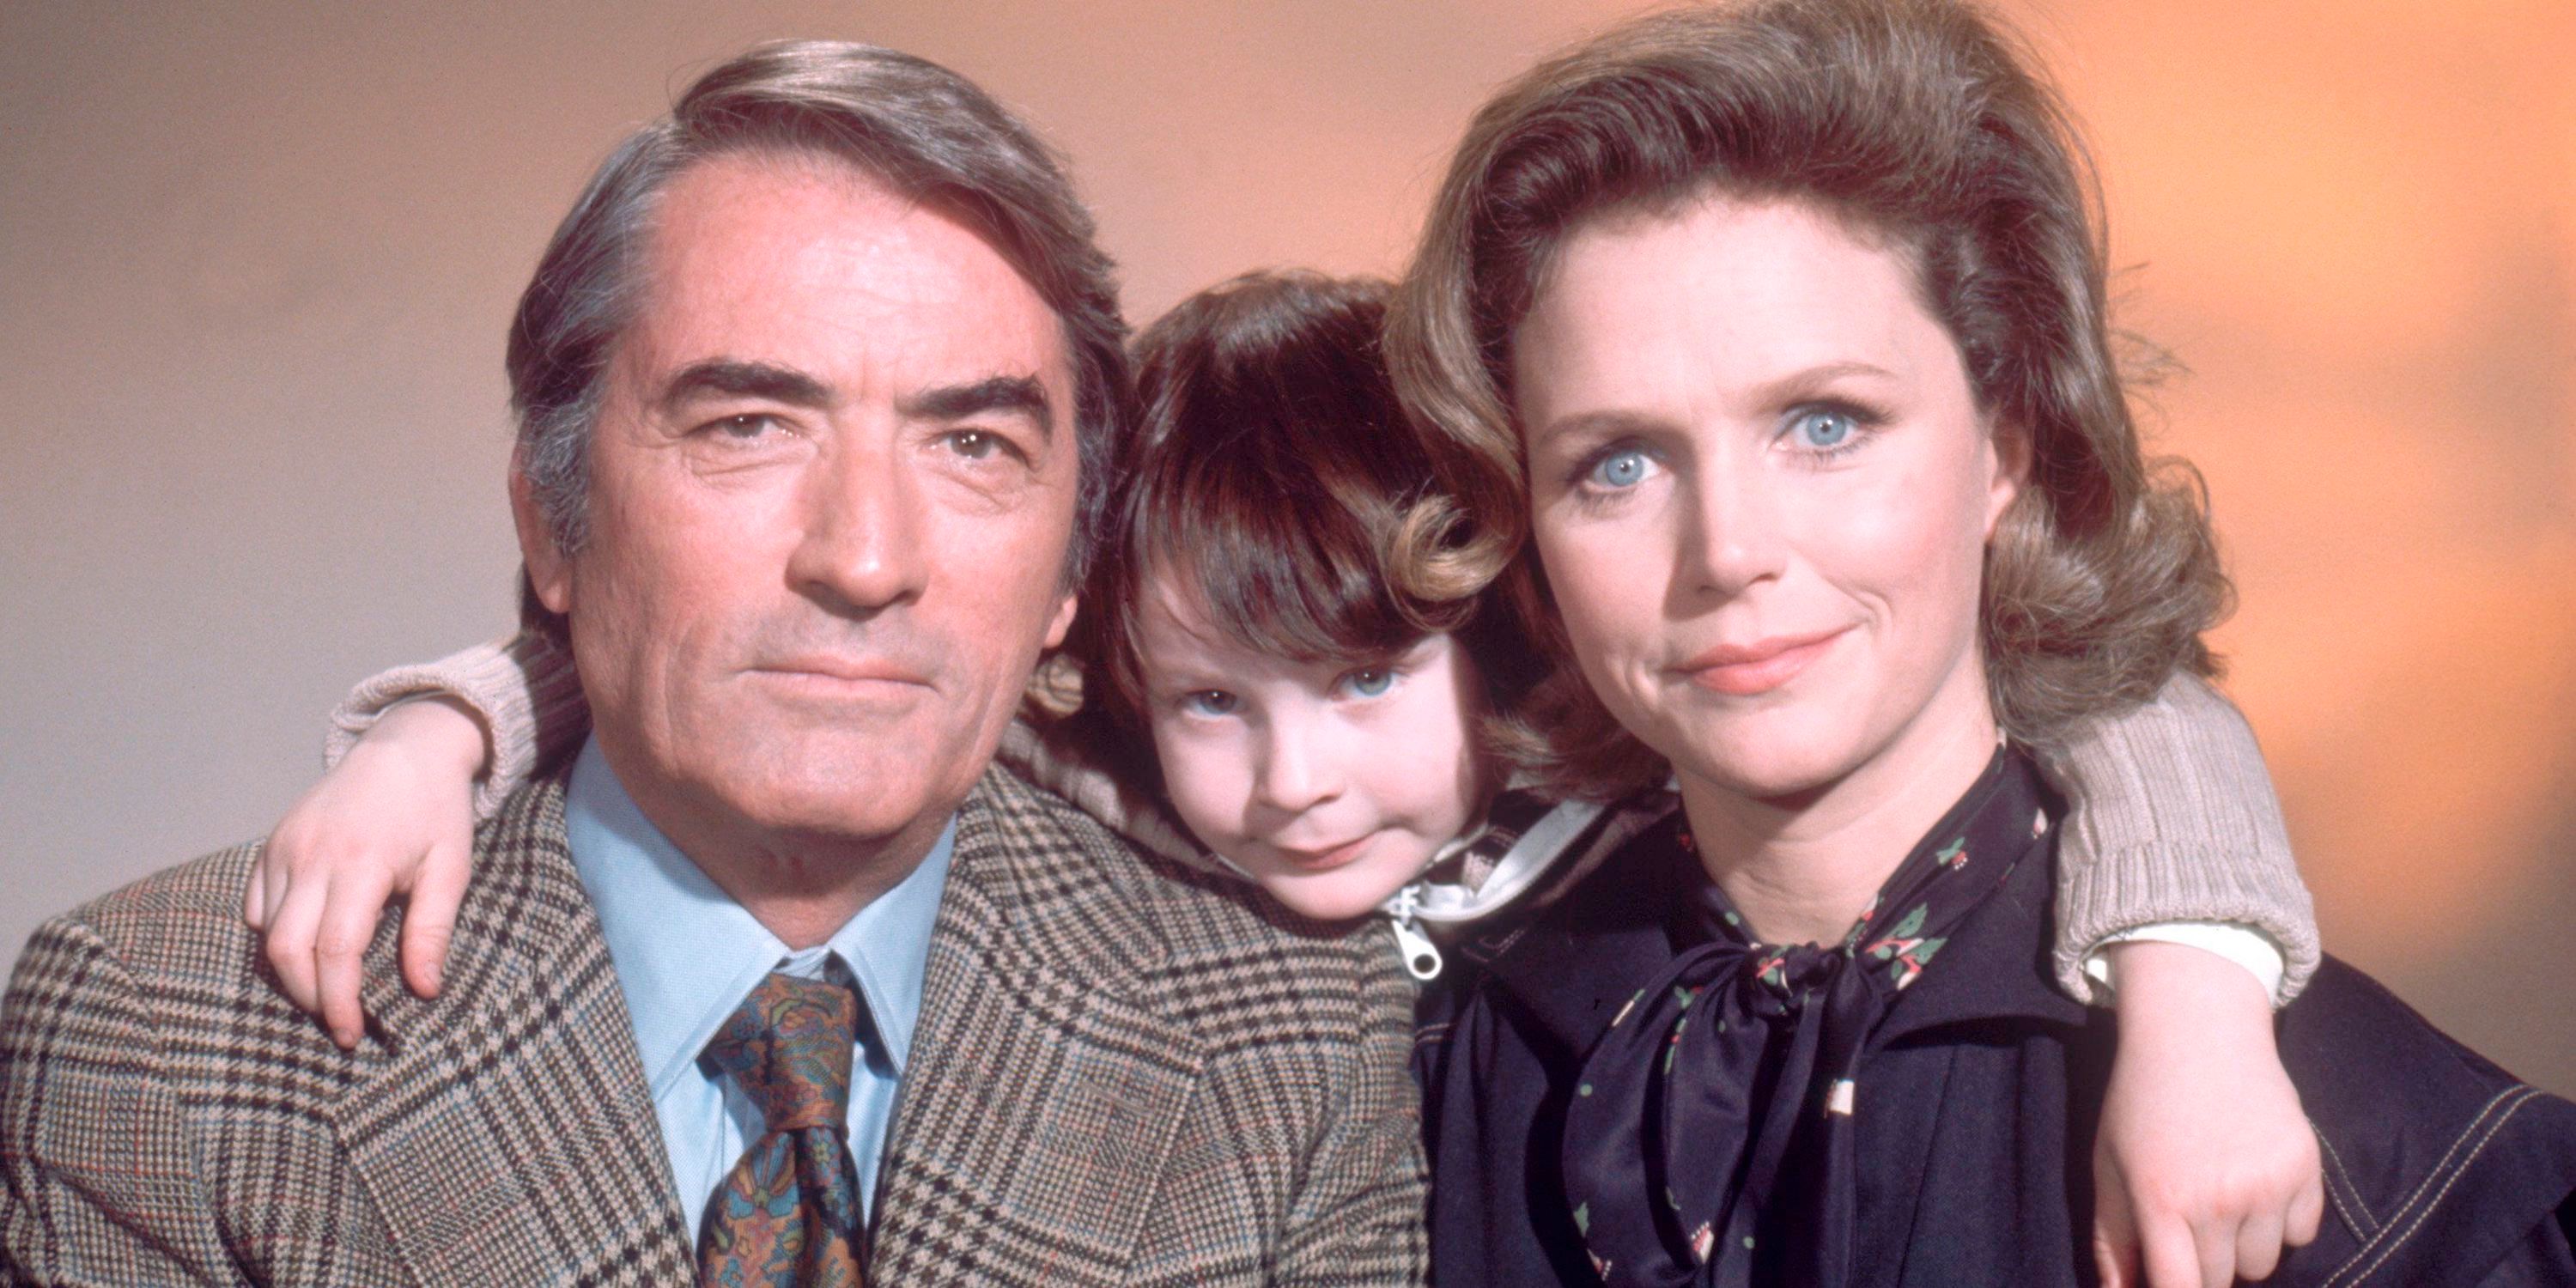 Gregory Peck, Harvey Stephens, and Lee Remick in The Omen